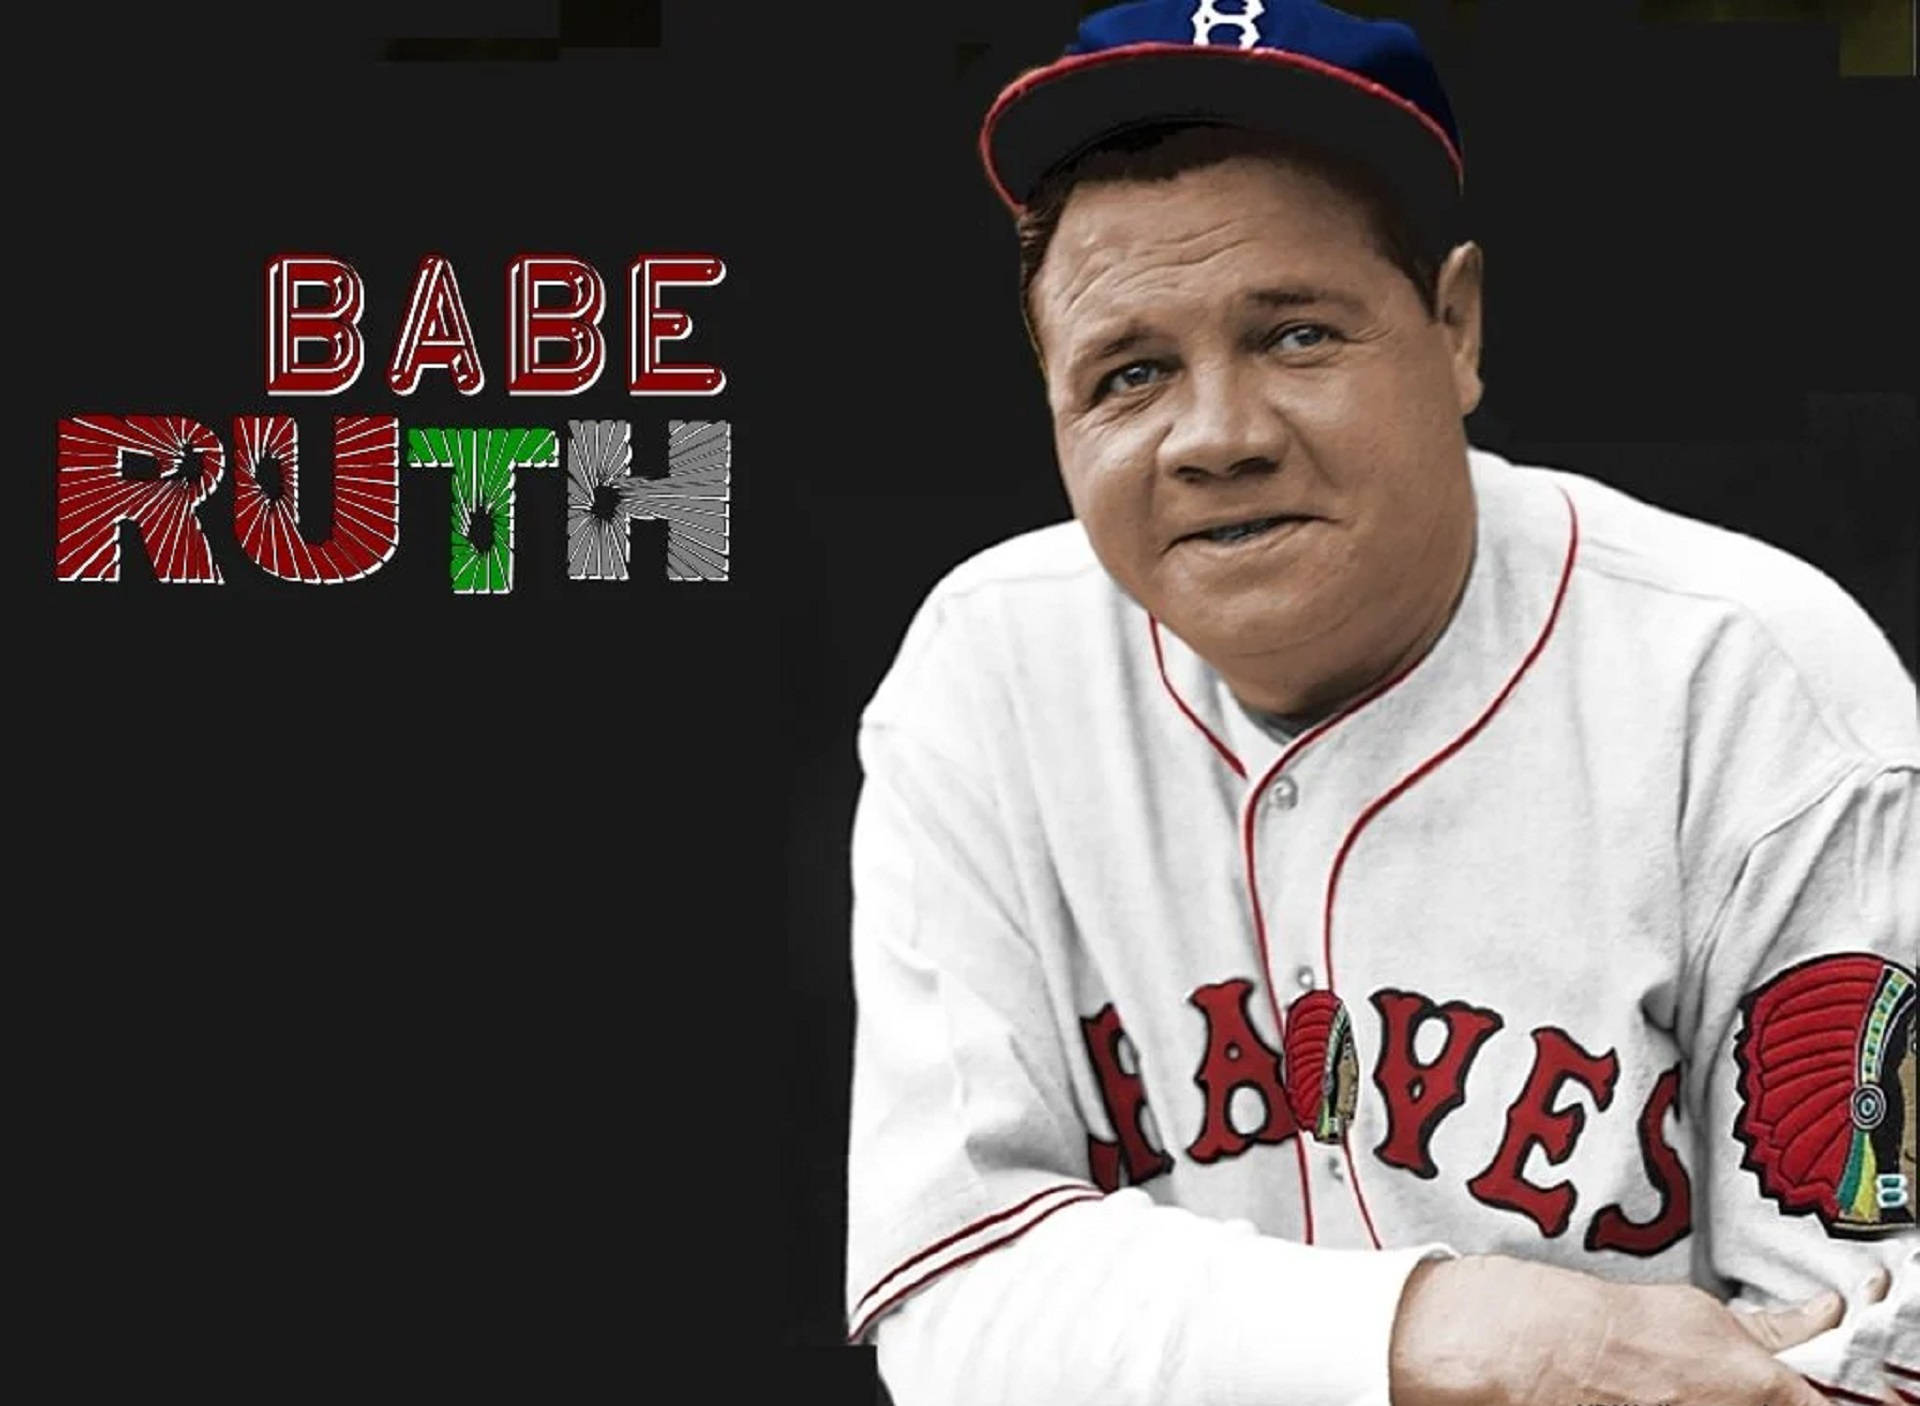 Babe Ruth Poster In Black Background